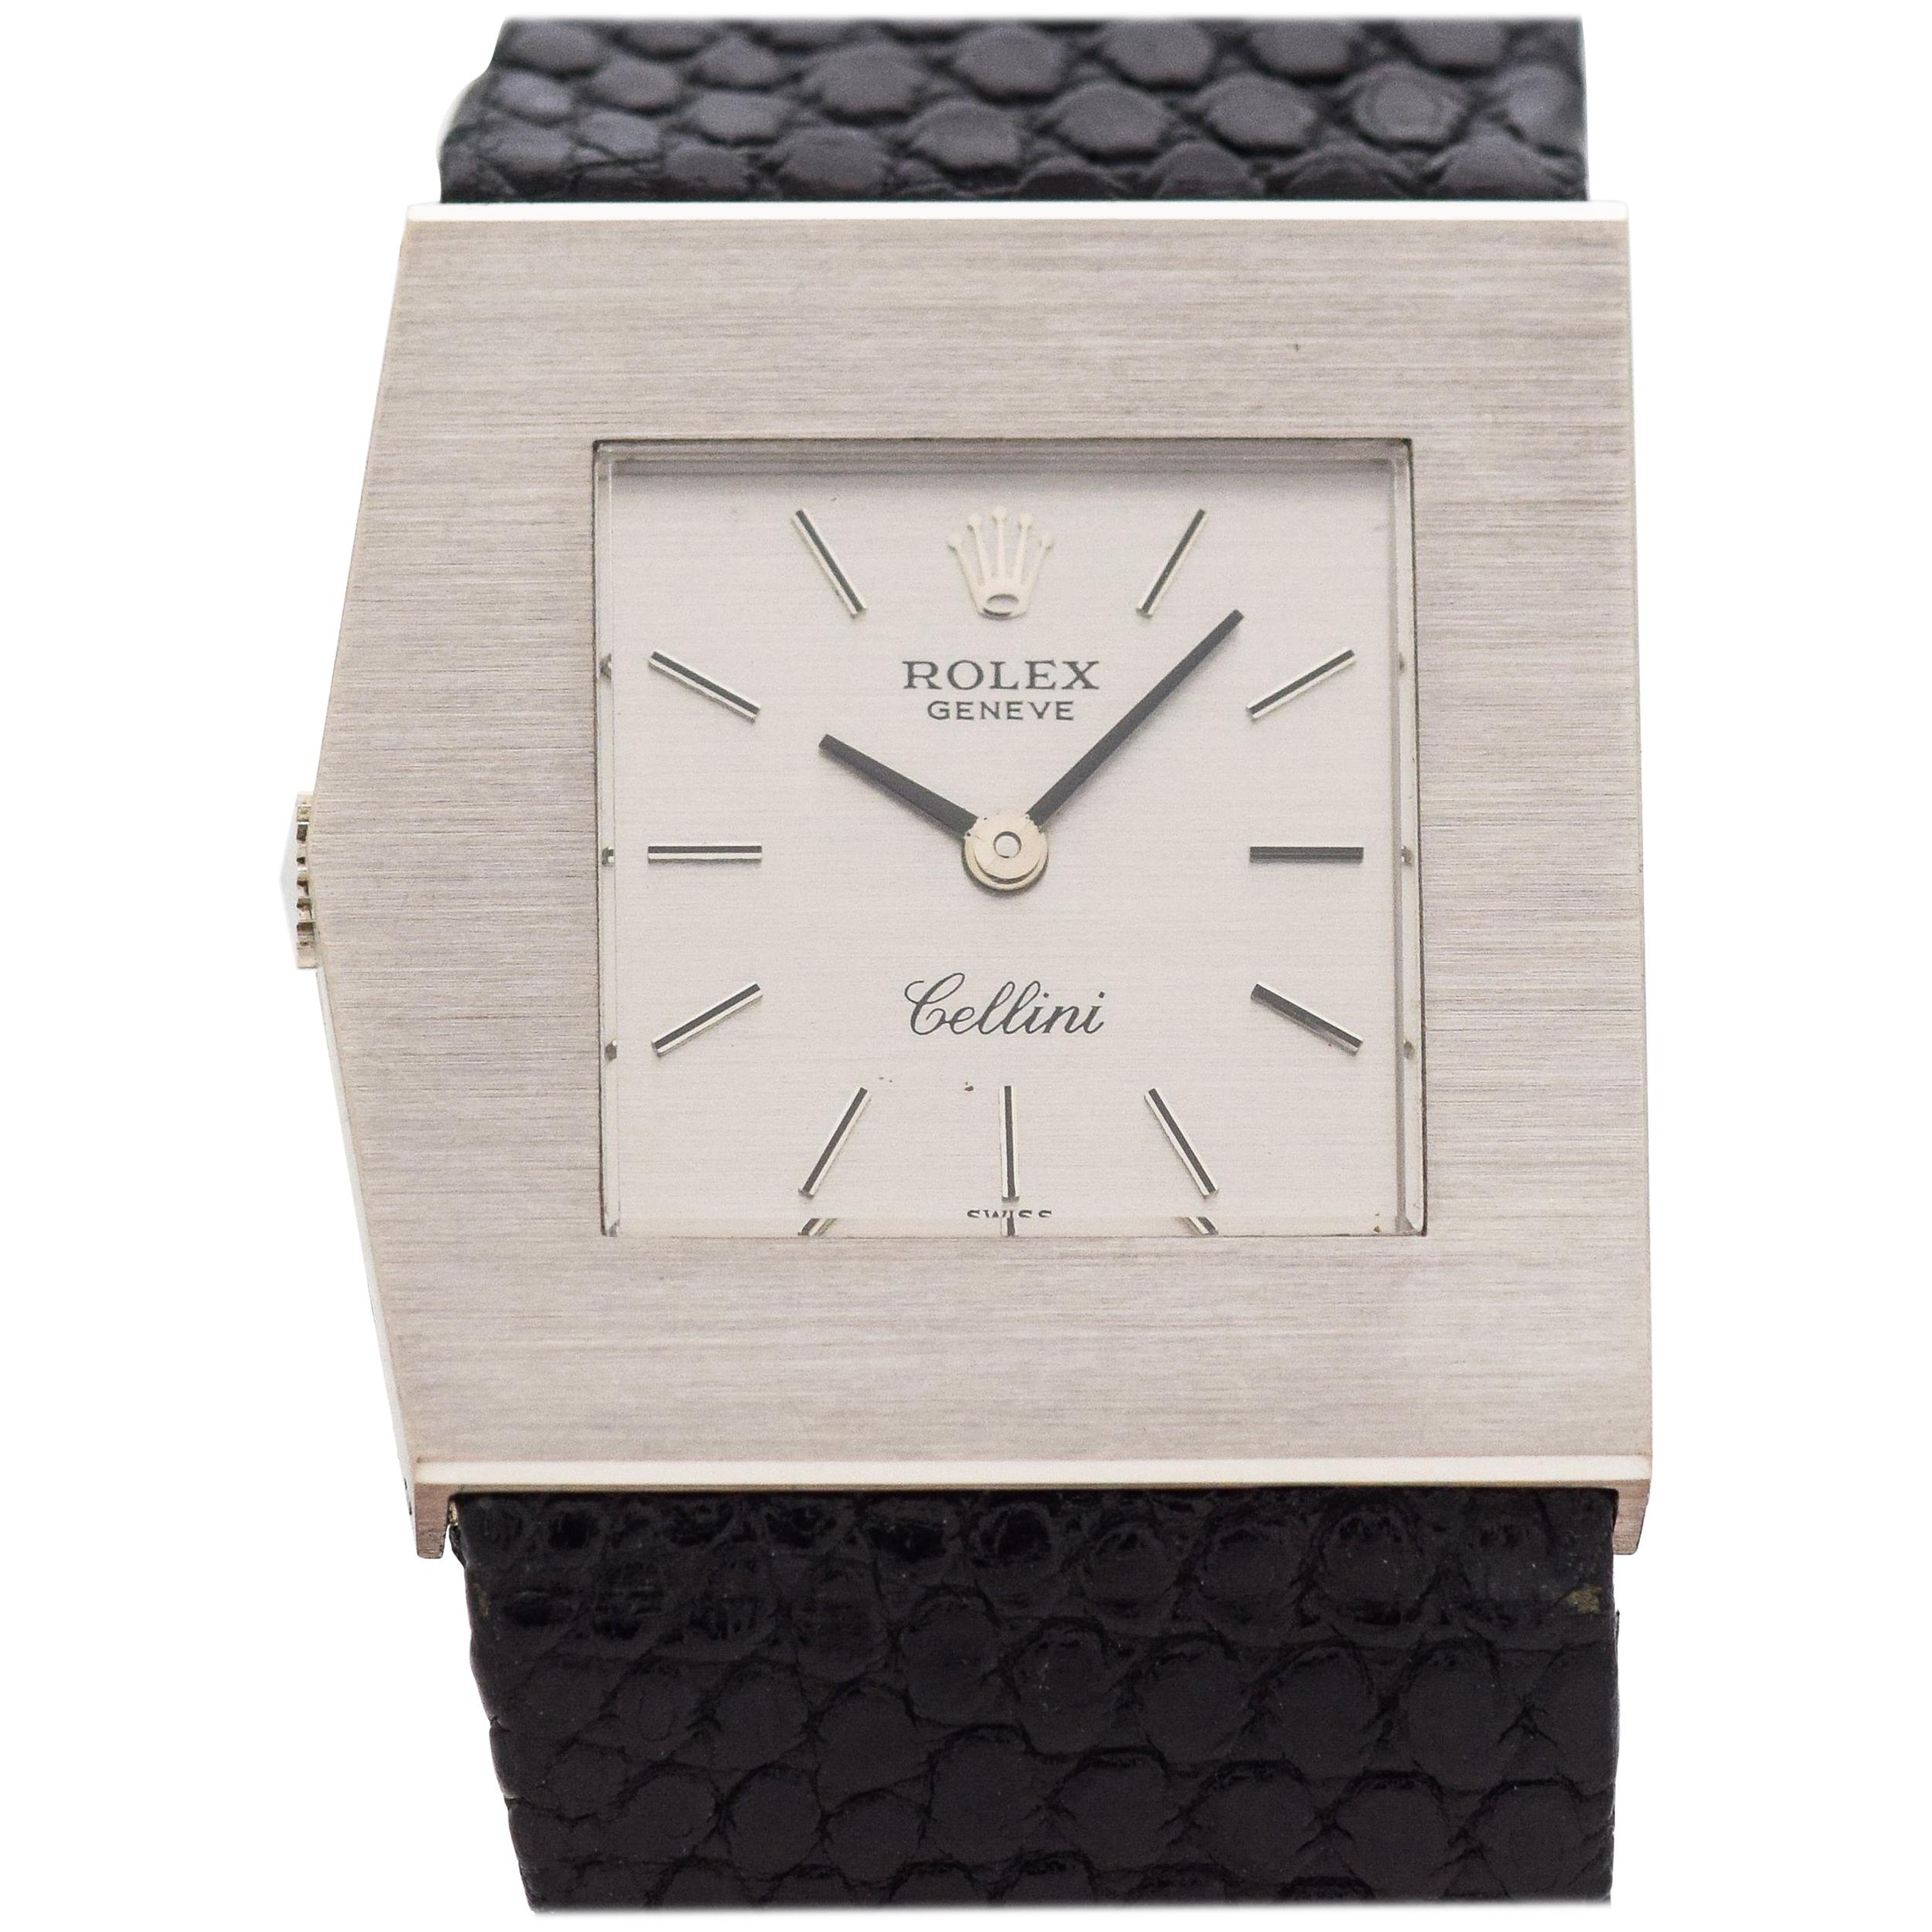 Vintage Rolex King Midas Cellini Reference 40170-10 in 18 Karat White Gold 1970s For Sale